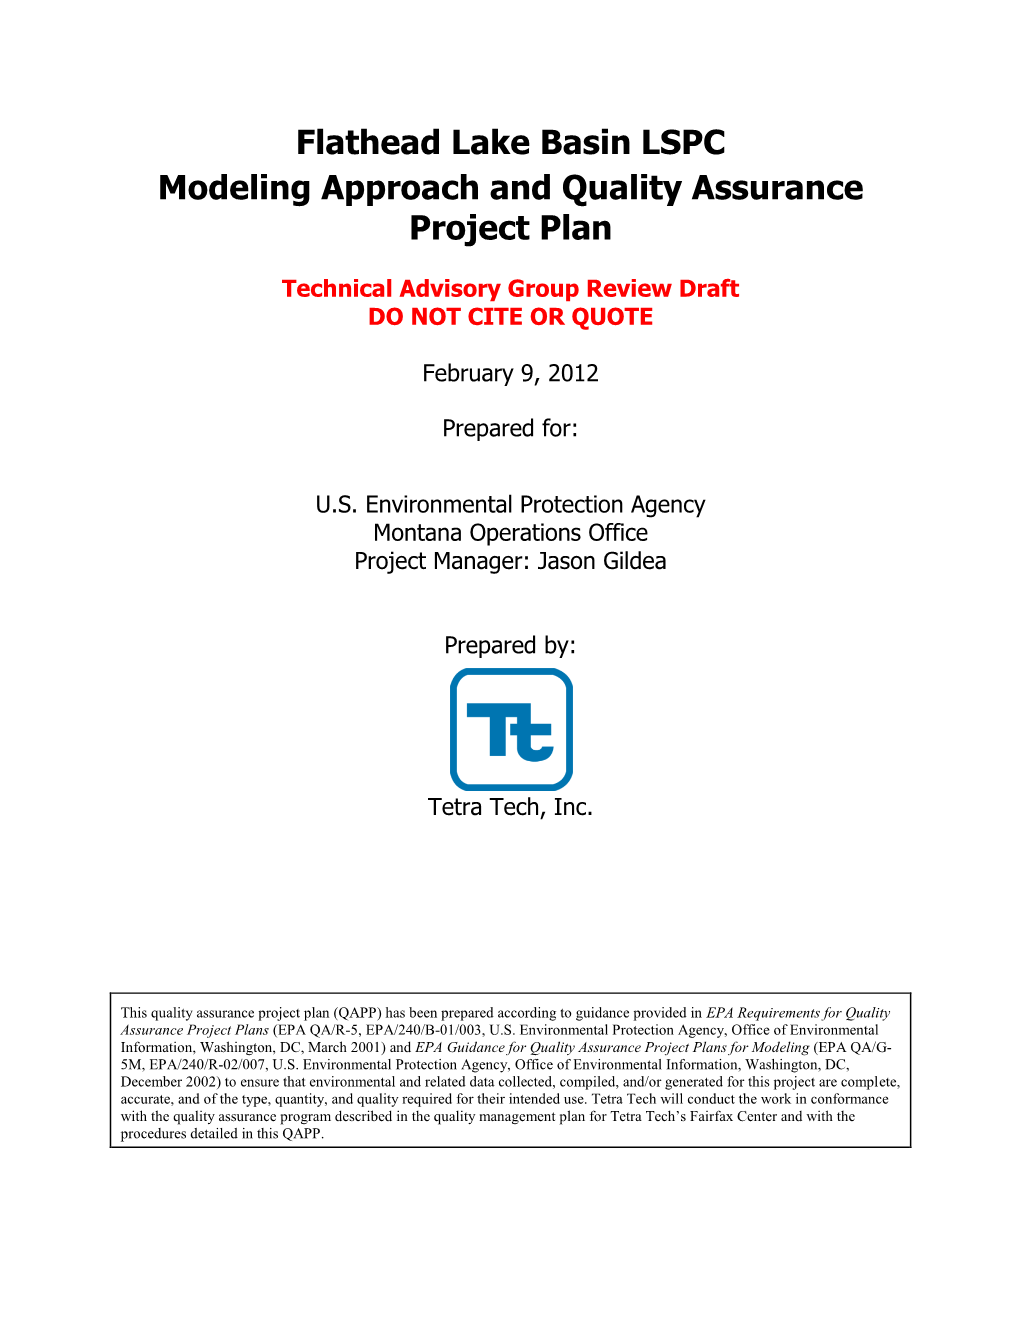 Modeling Approach and Quality Assurance Project Plan, Flathead